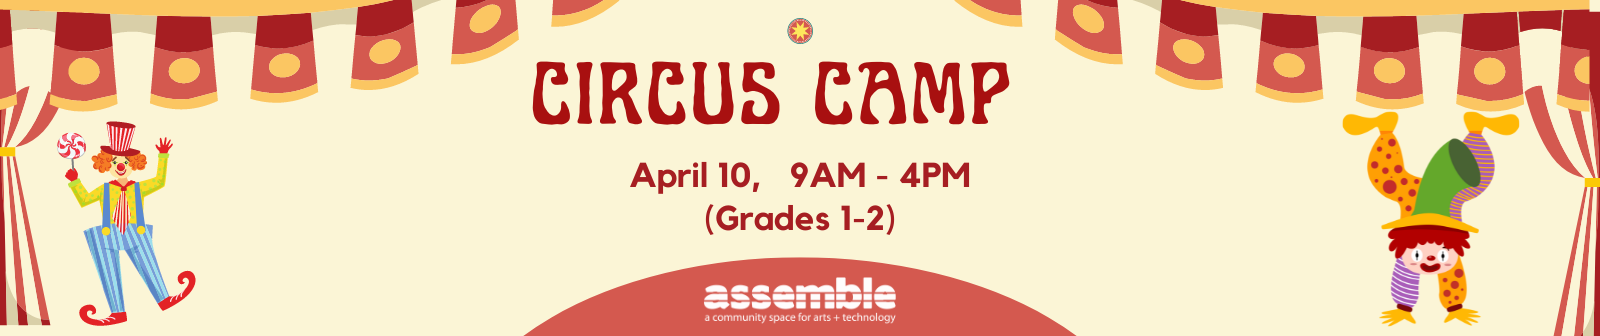 graphic that reads circus camp april 10, 9am-4pm grades 1-2 with assemble logo